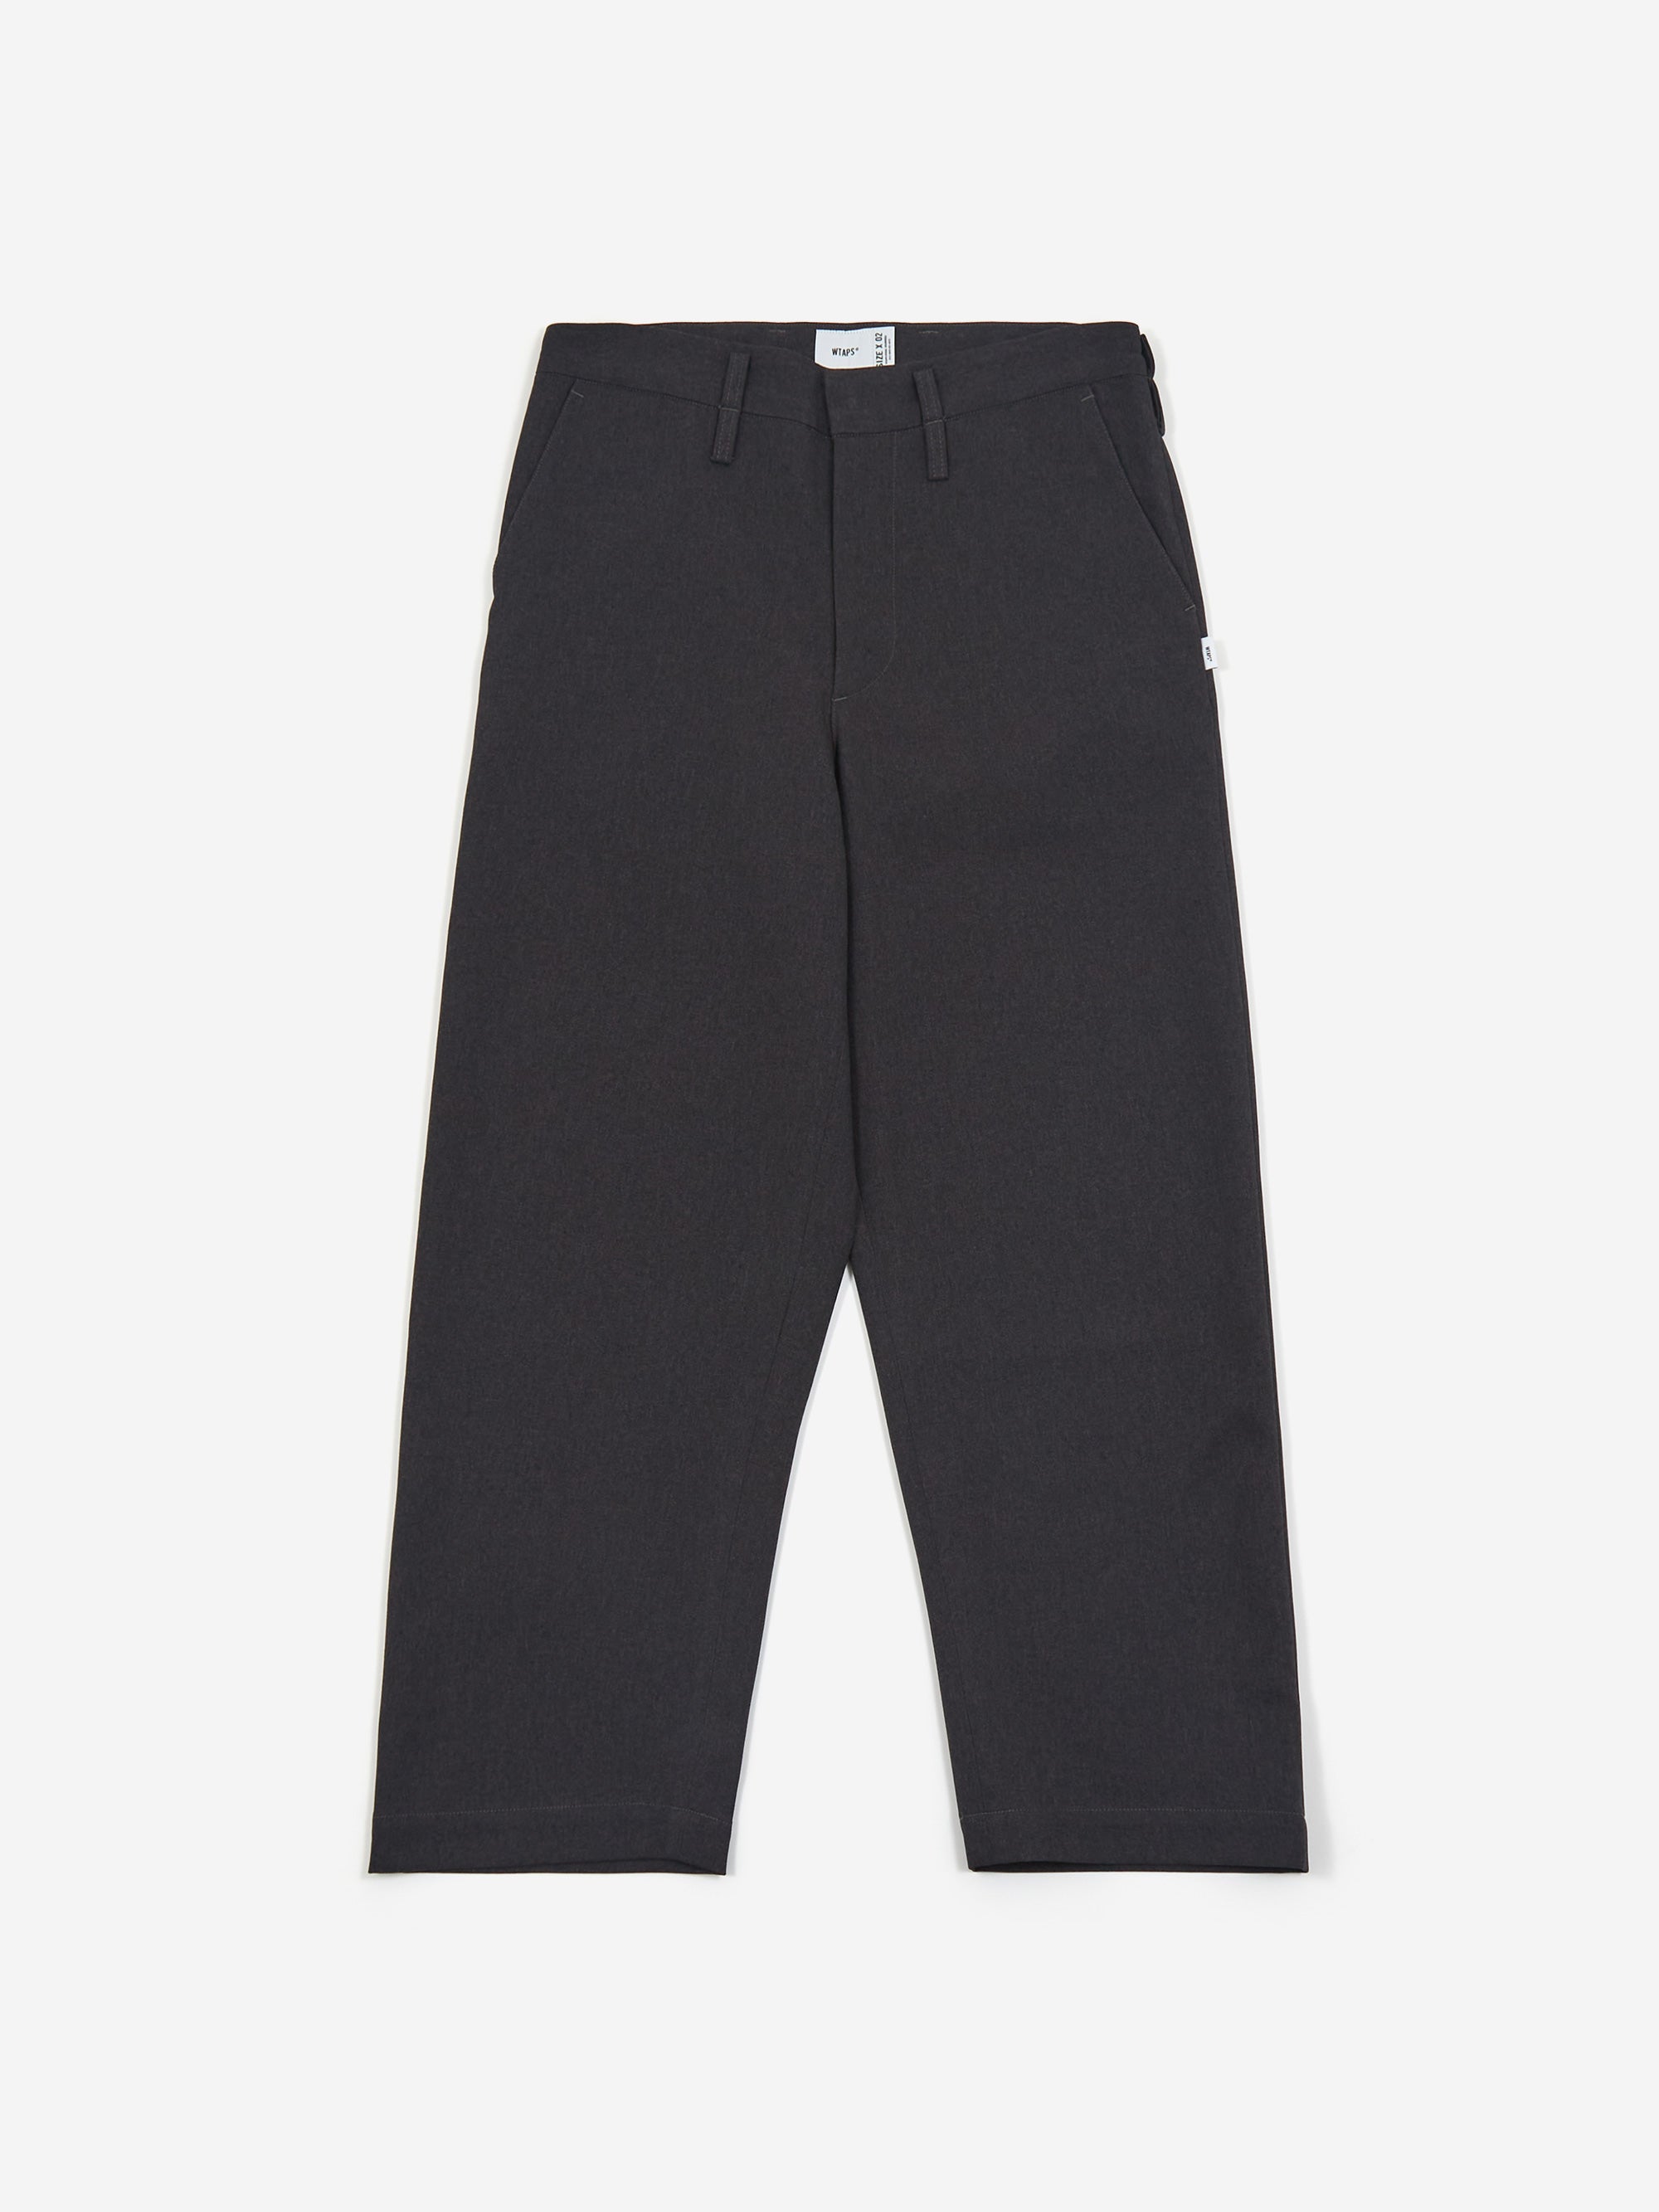 22SS M WTAPS CREASE DL TROUSERS CHARCOAL